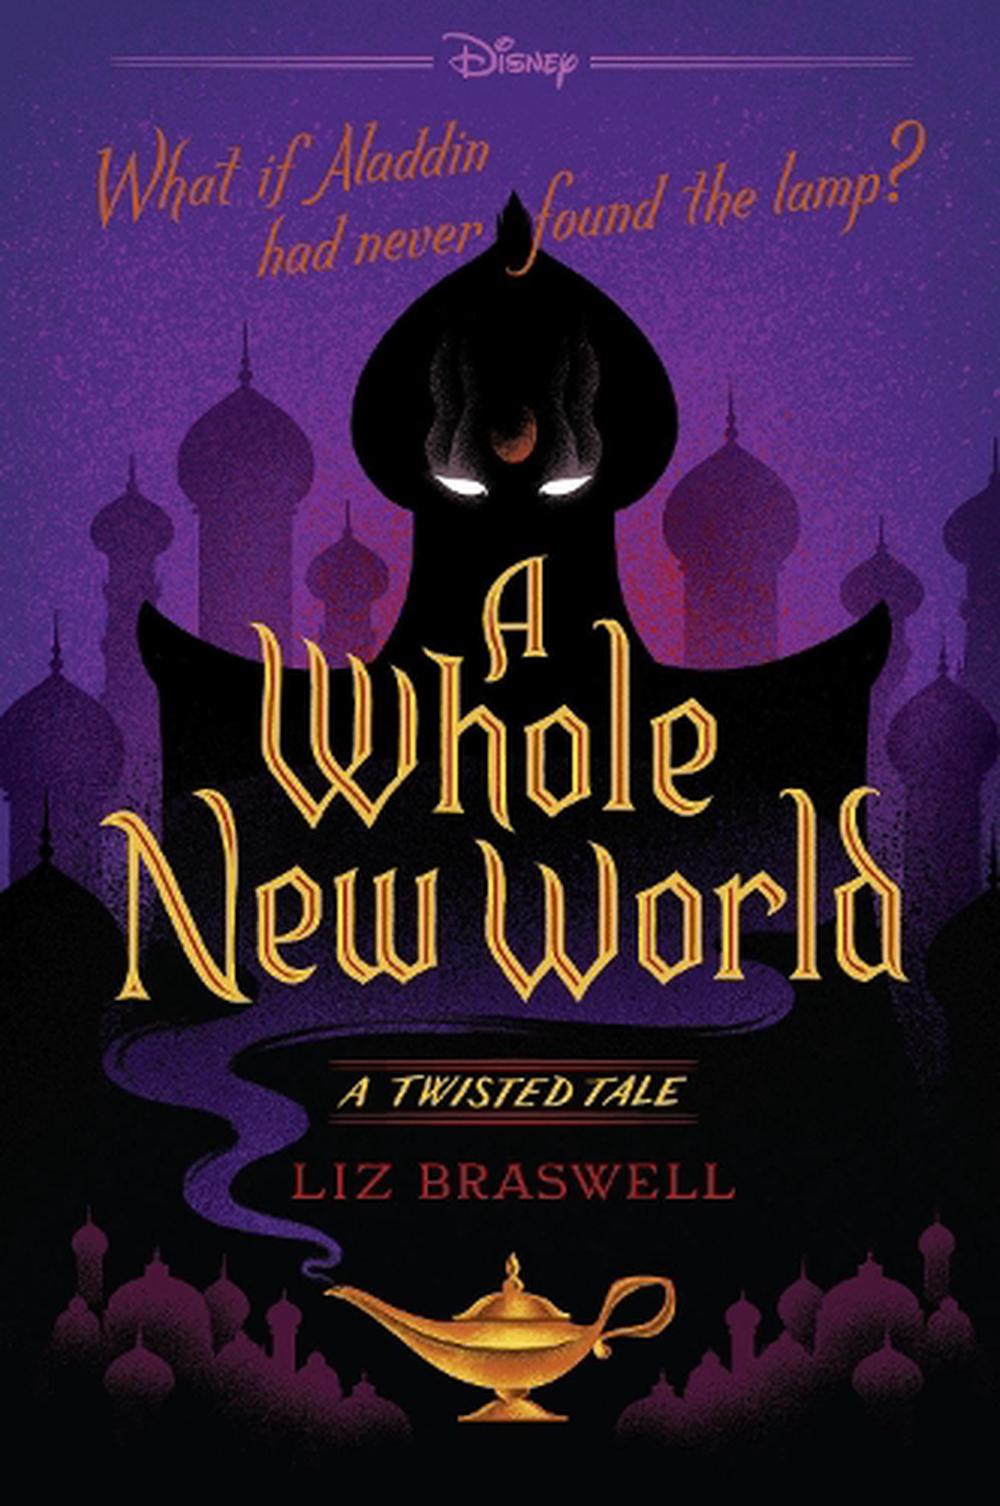 part of your world twisted tale paperback